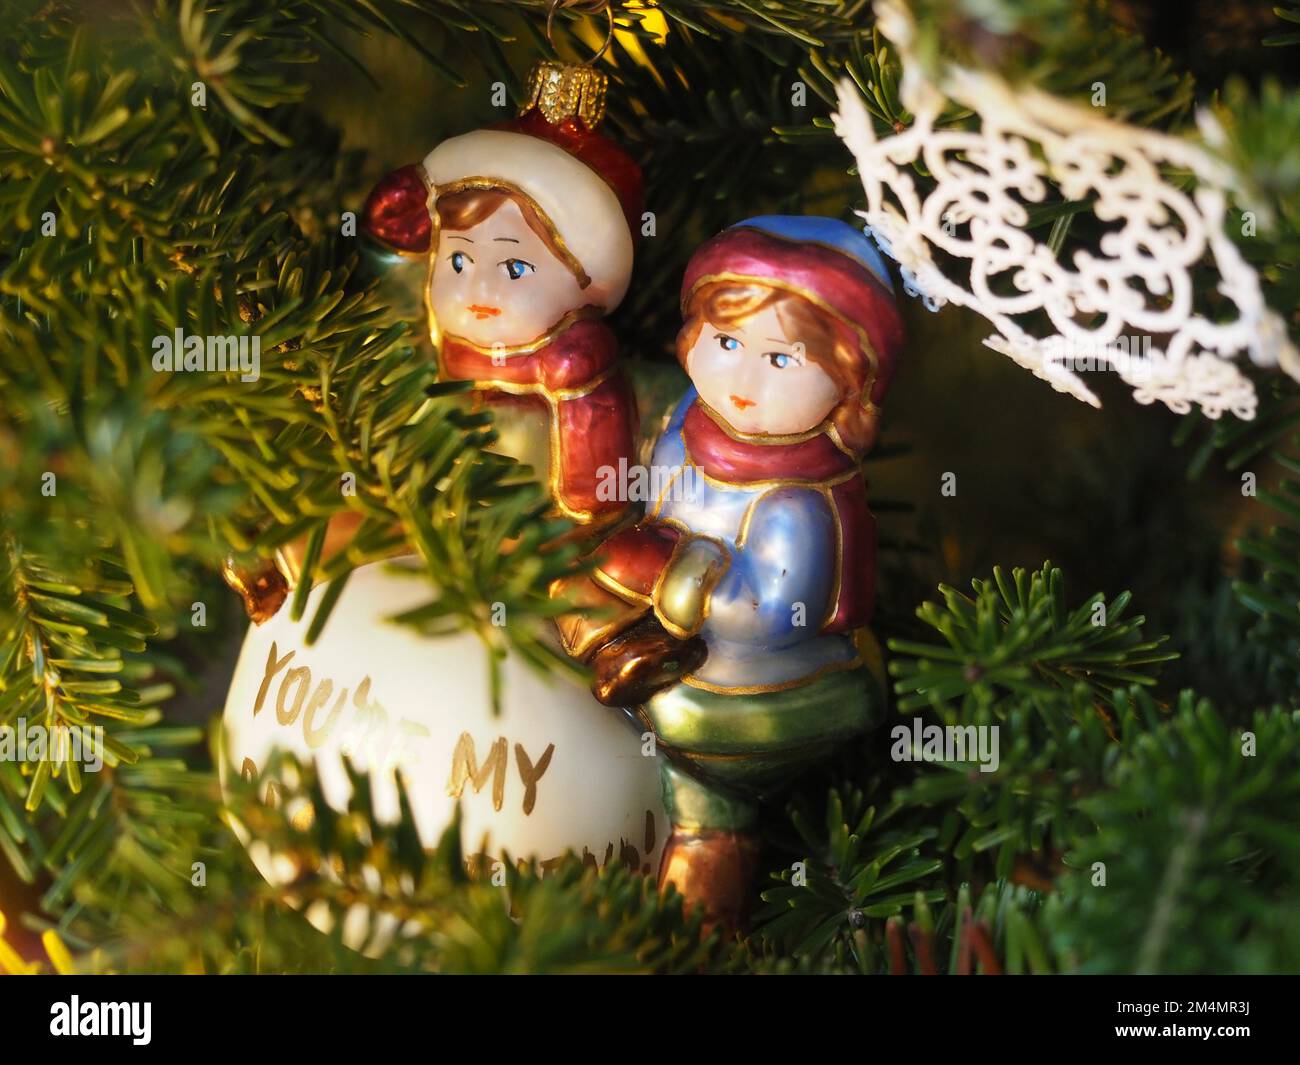 Vintage Christmas Tree Decoration - Bauble in Kids Shape Stock Photo